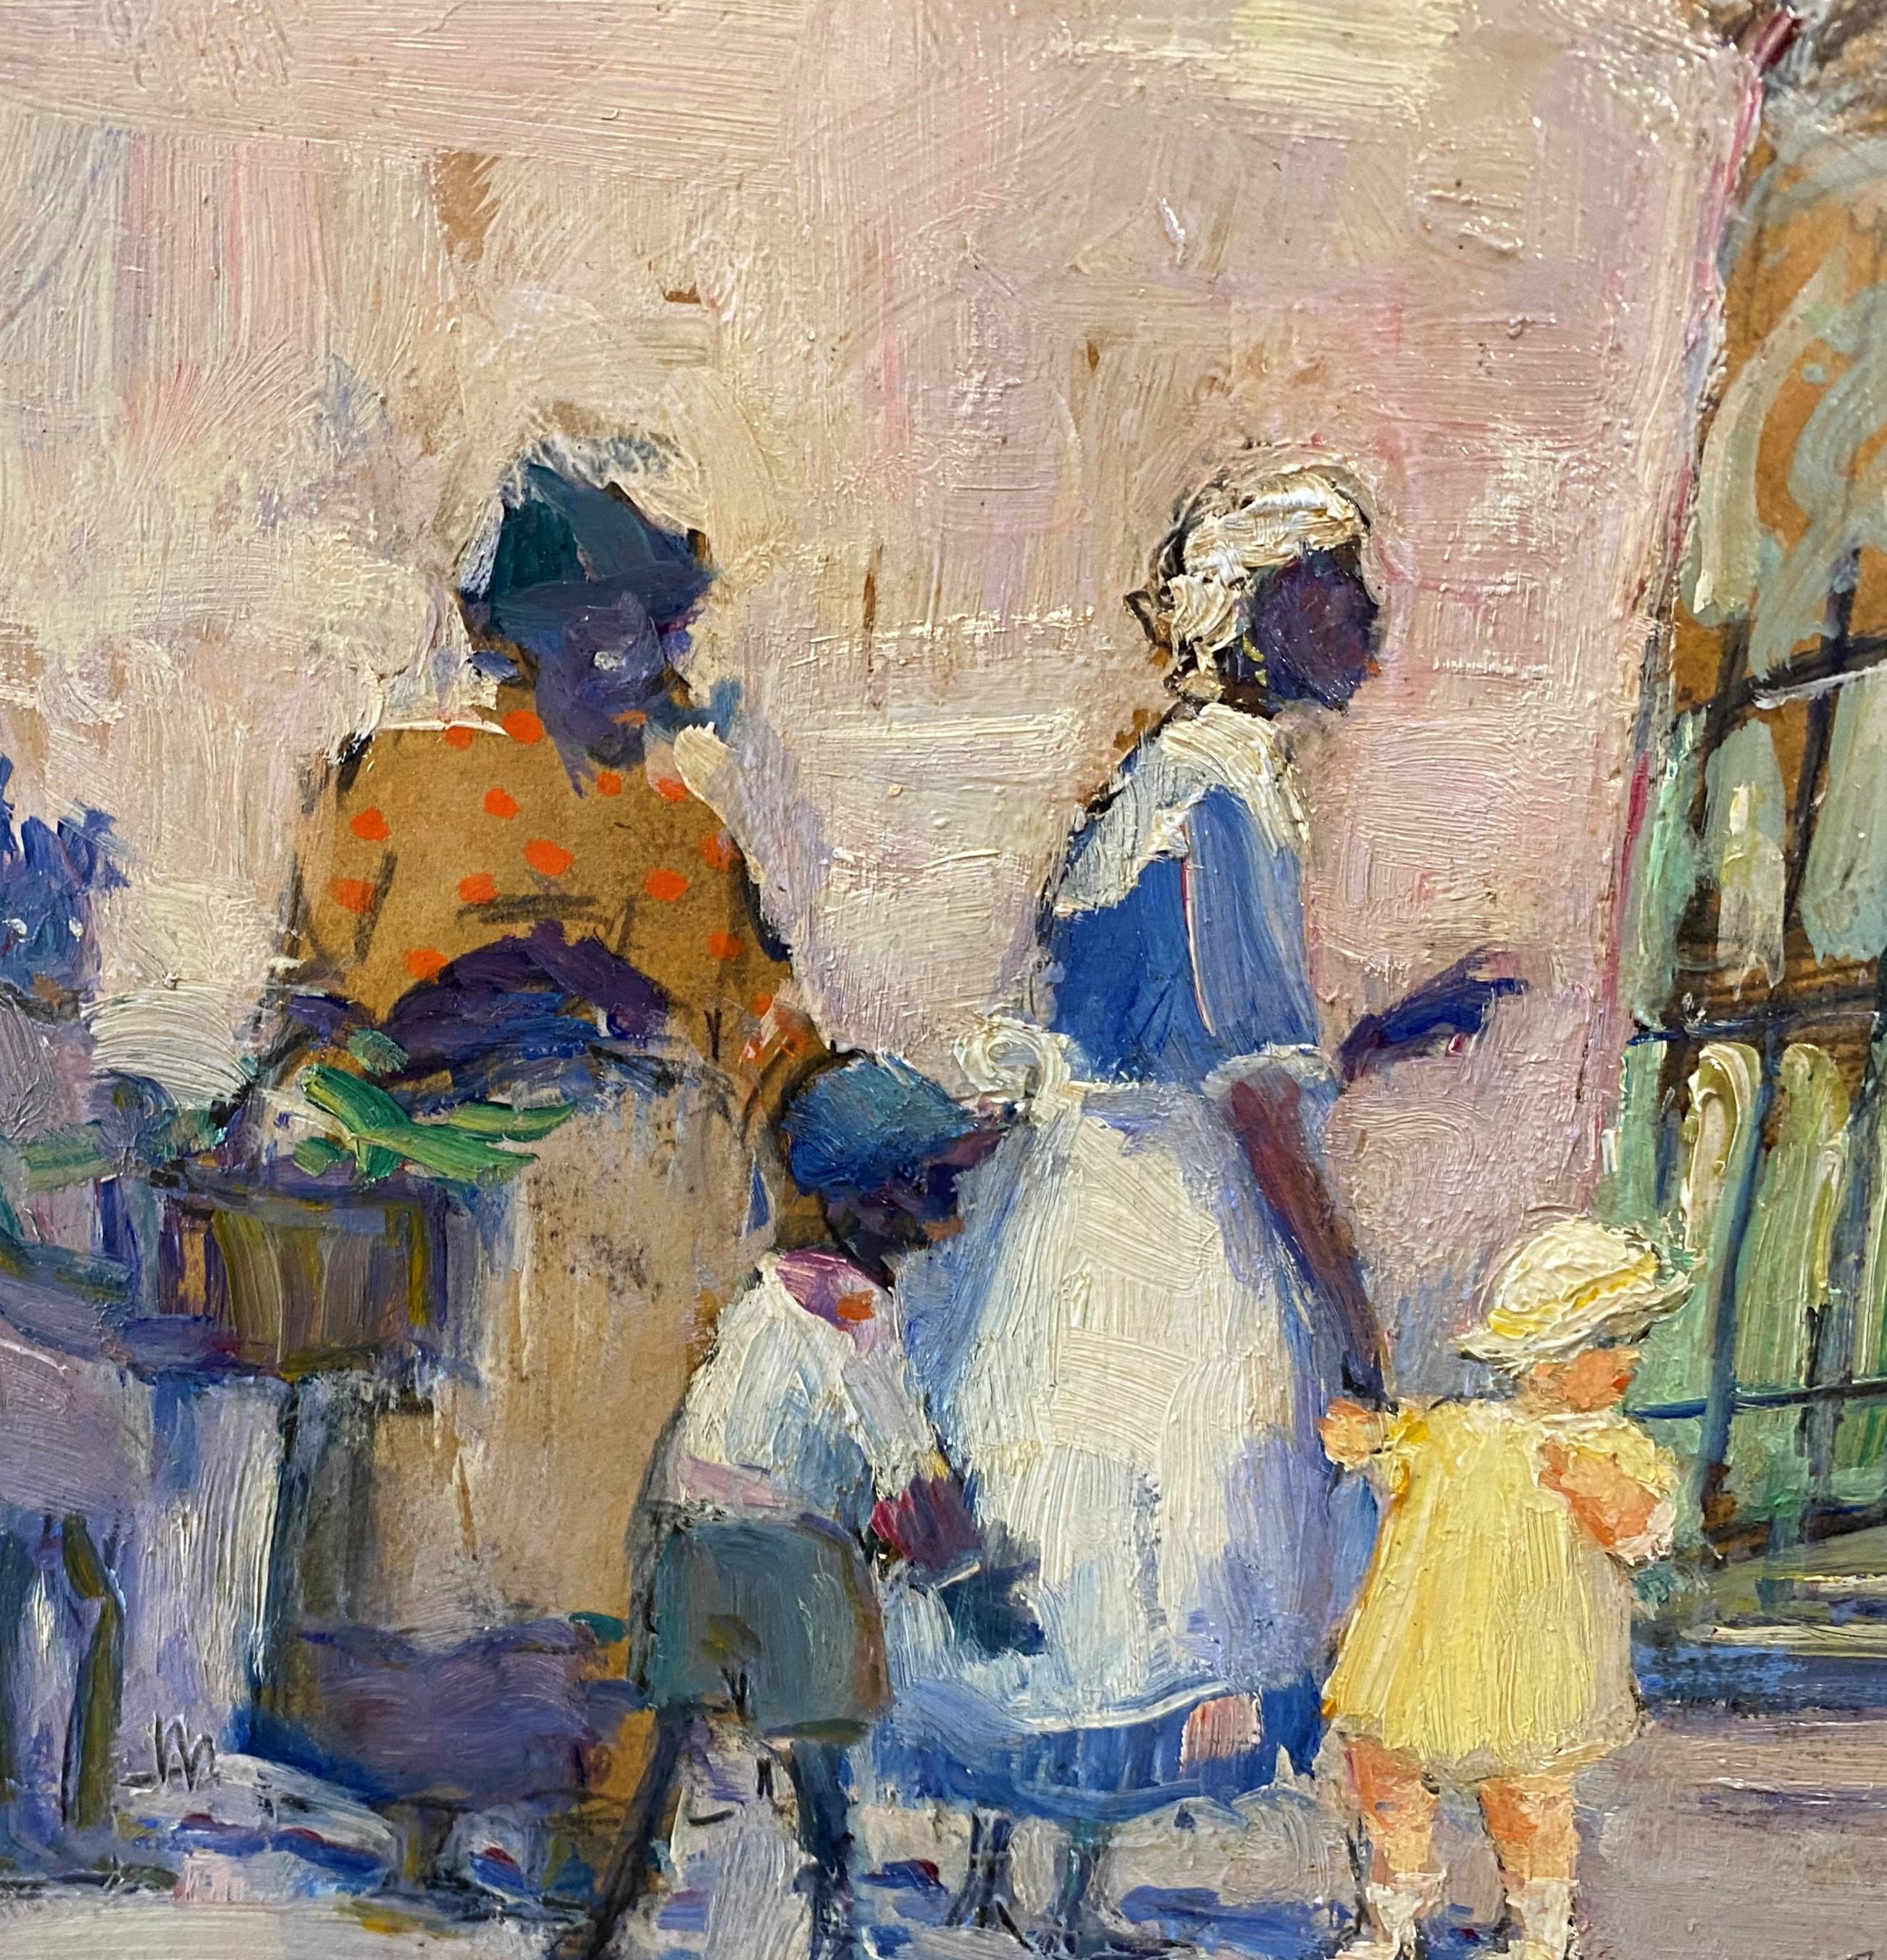 Southern Scene, Possibly Charleston, South Carolina - American Impressionist Painting by Rachel Hartley